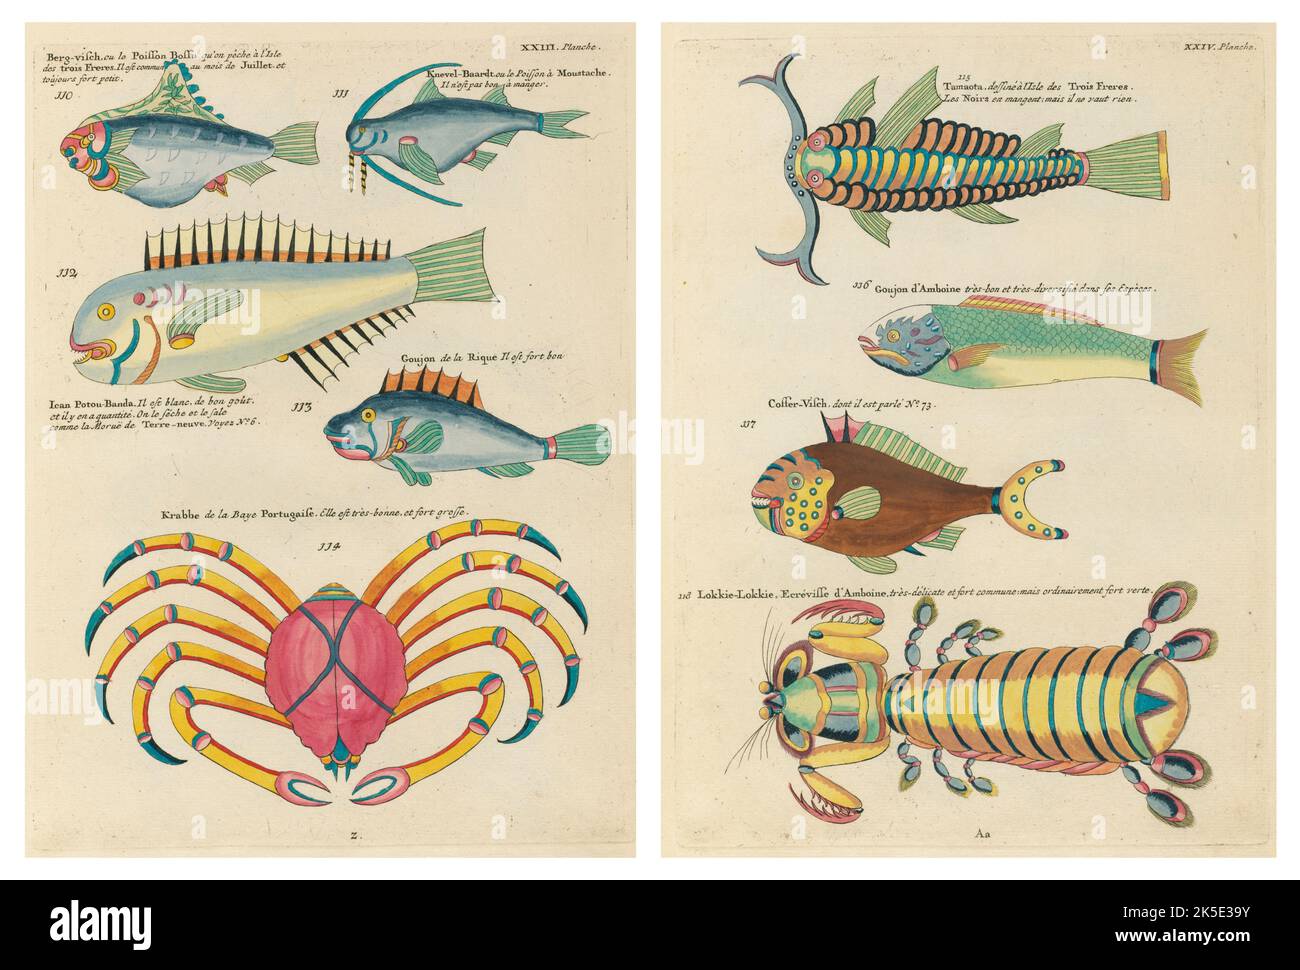 Antique illustrations of Fish, Crab and Crayfish with annotations in French.From Louis Renard's Poissons, Ecrevisses et Crabes, published in 1754. Coloured copper engravings organished as 2 pages from the original title laid side-by-side. Stock Photo